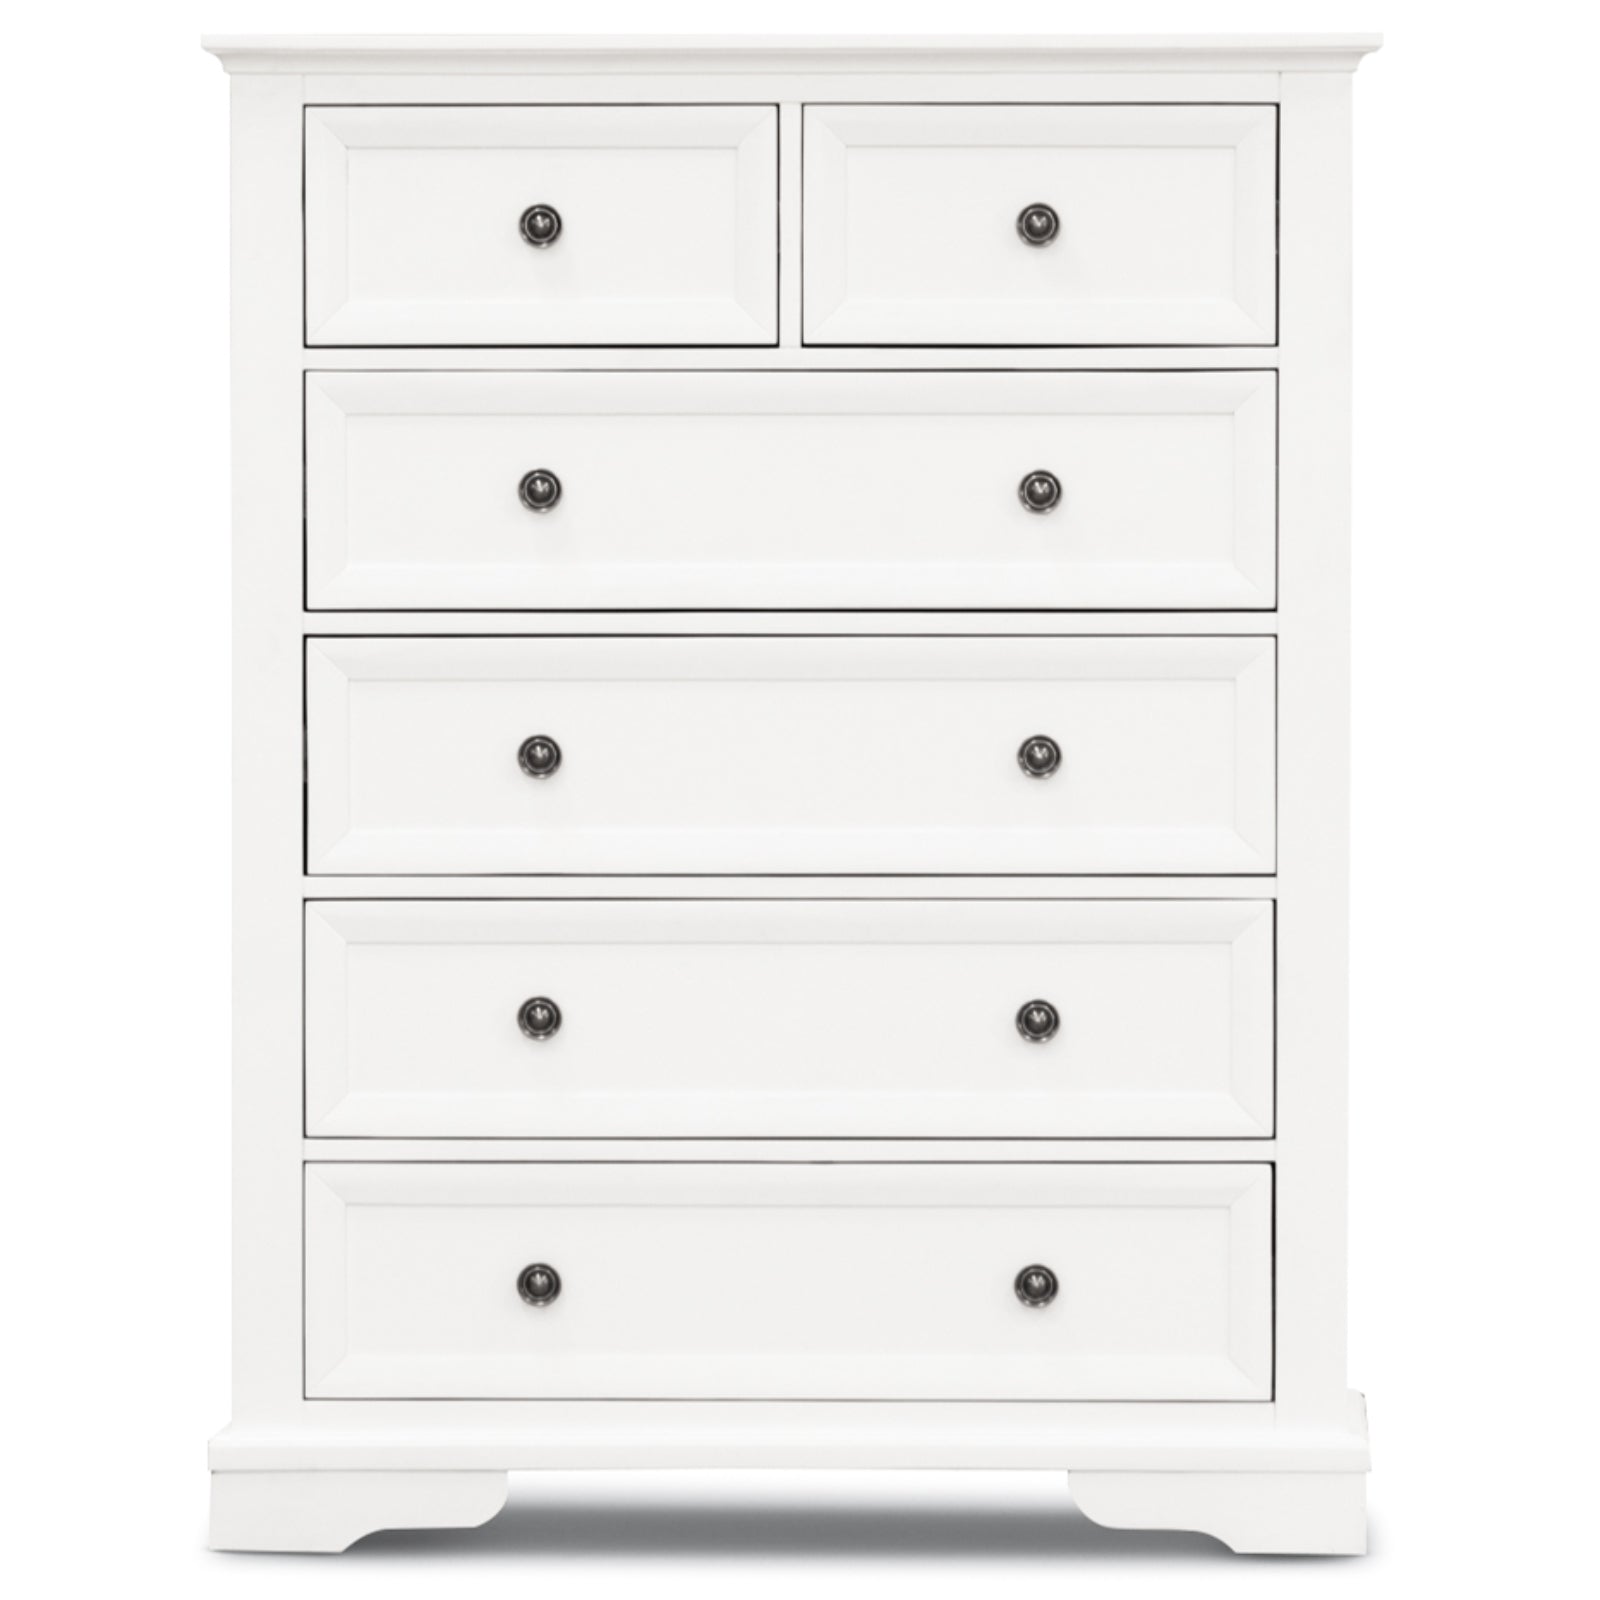 Tallboy 6 Chest of Drawers Solid Acacia Wood Bed Storage Cabinet - White